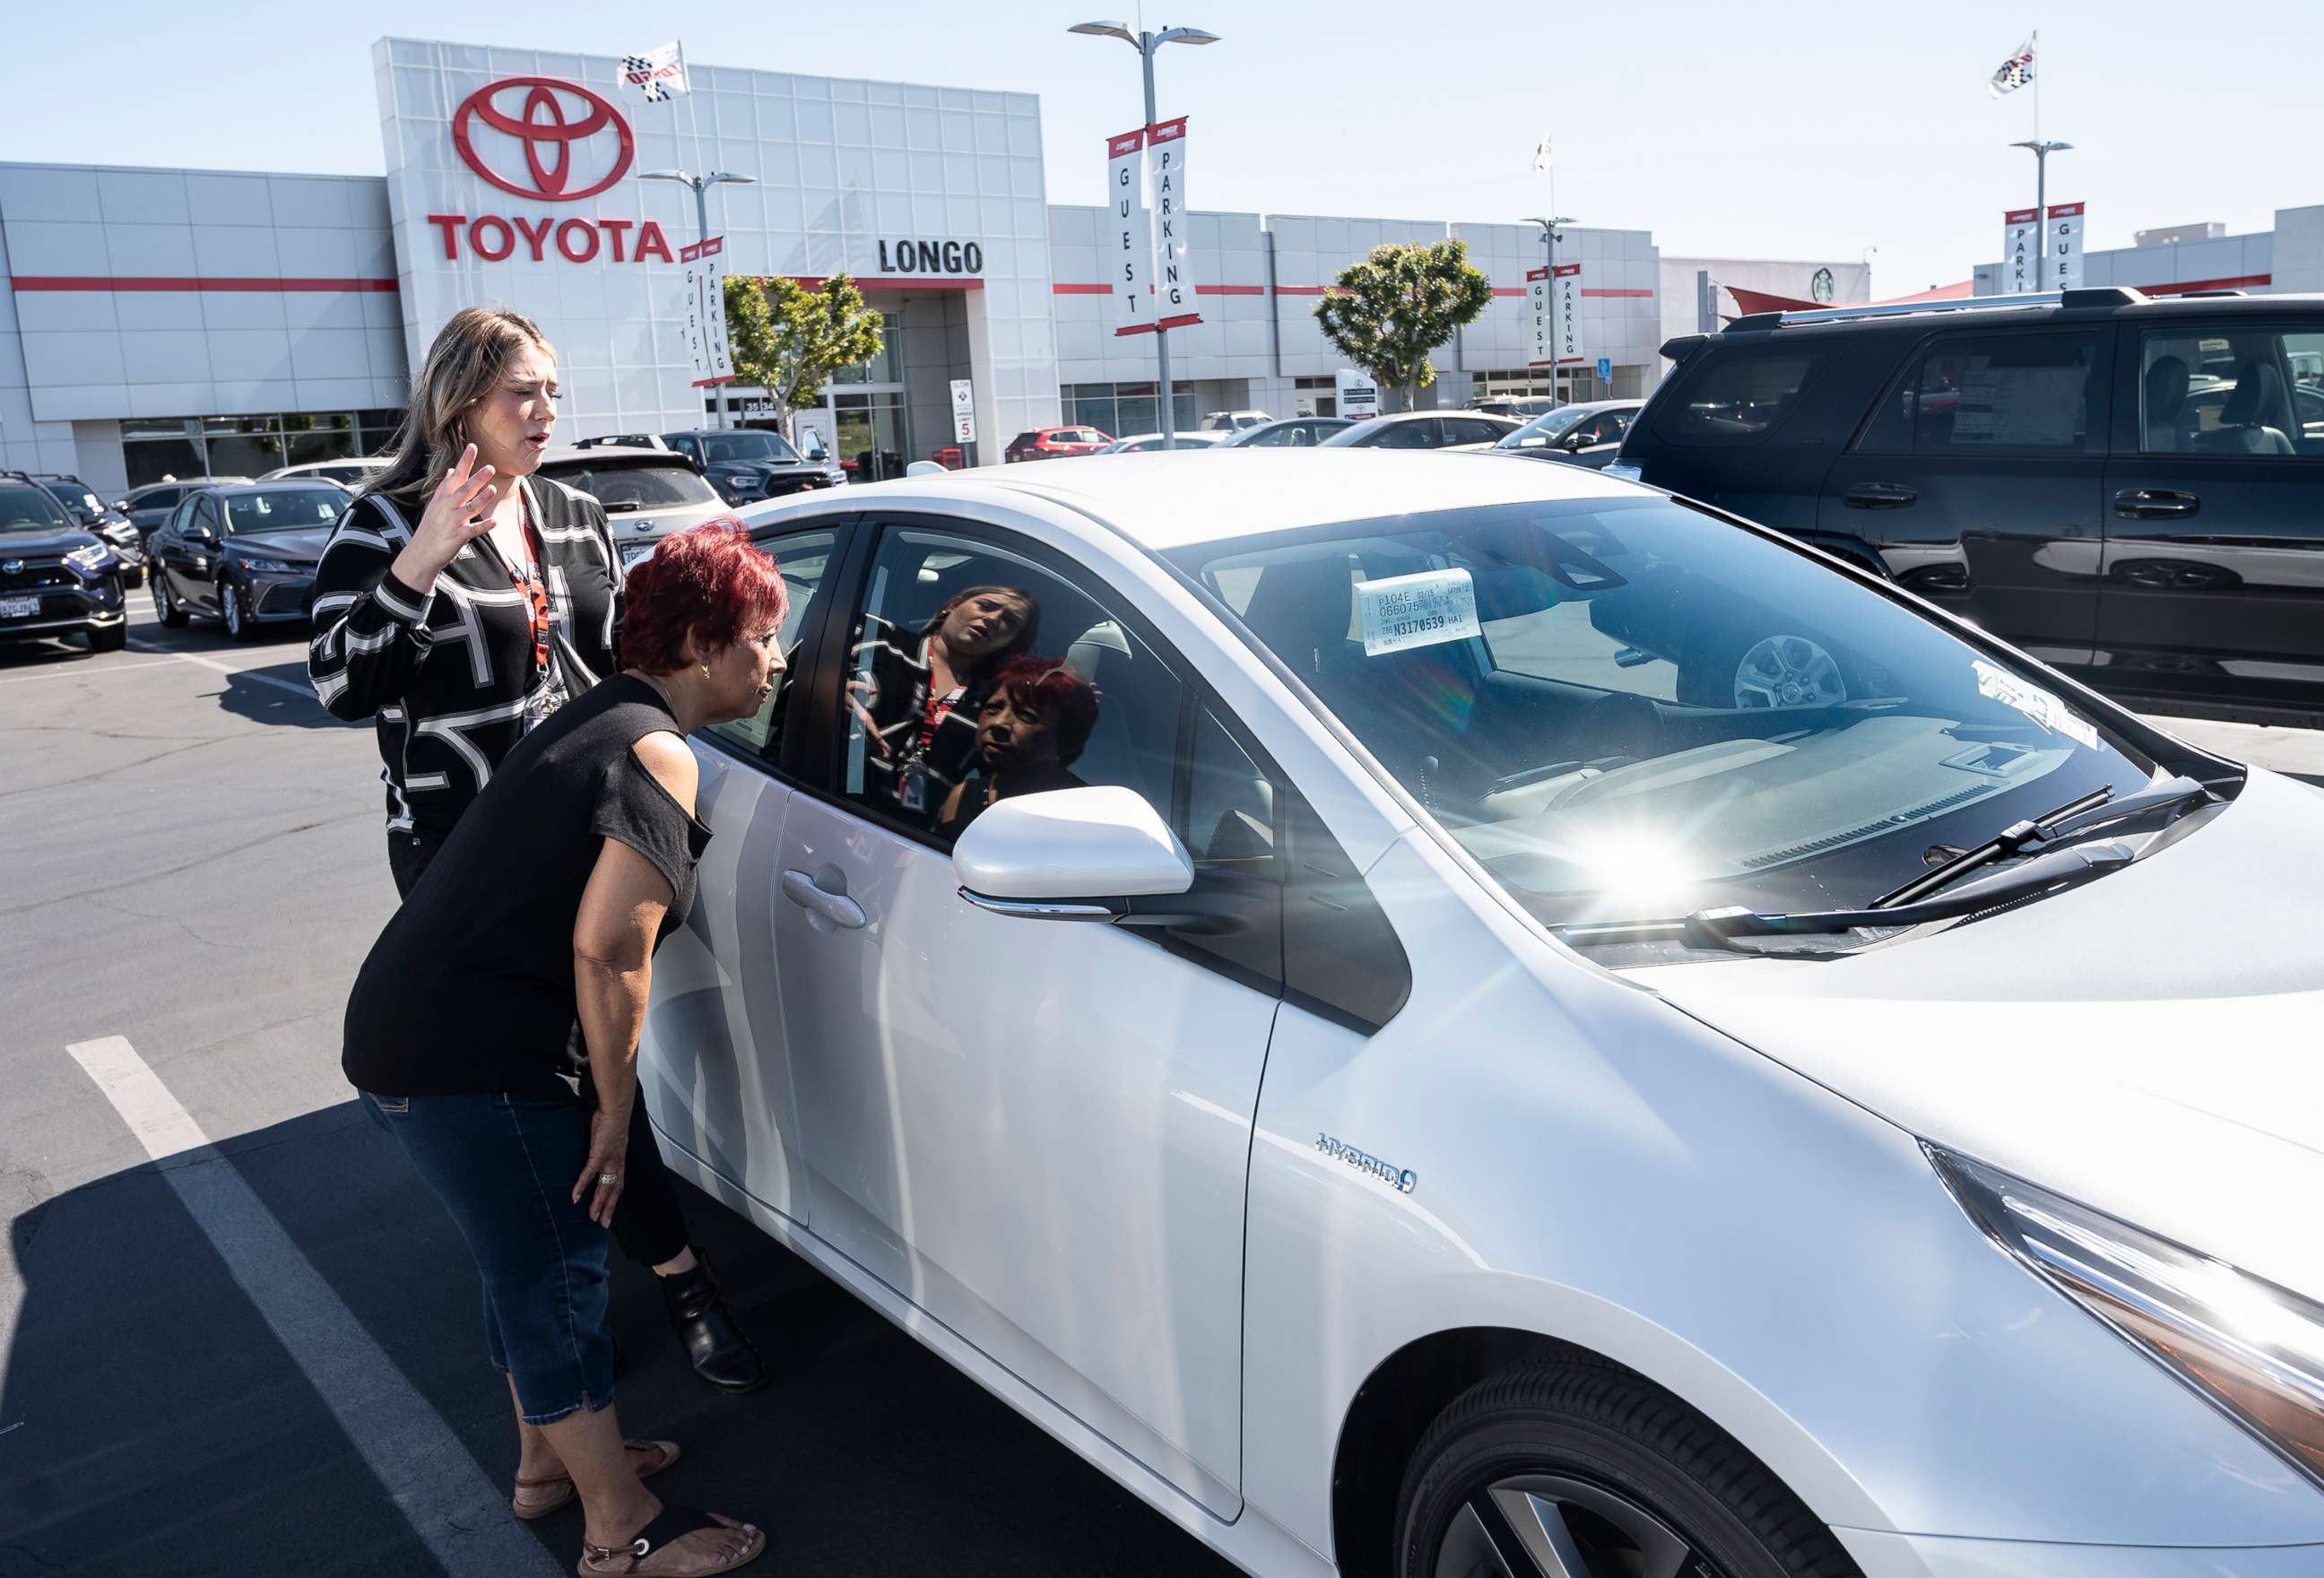 PHOTO: In this March 23, 2022, file photo, a customer is shown a 2022 Toyota Prius at Longo Toyota in El Monte, Calif.